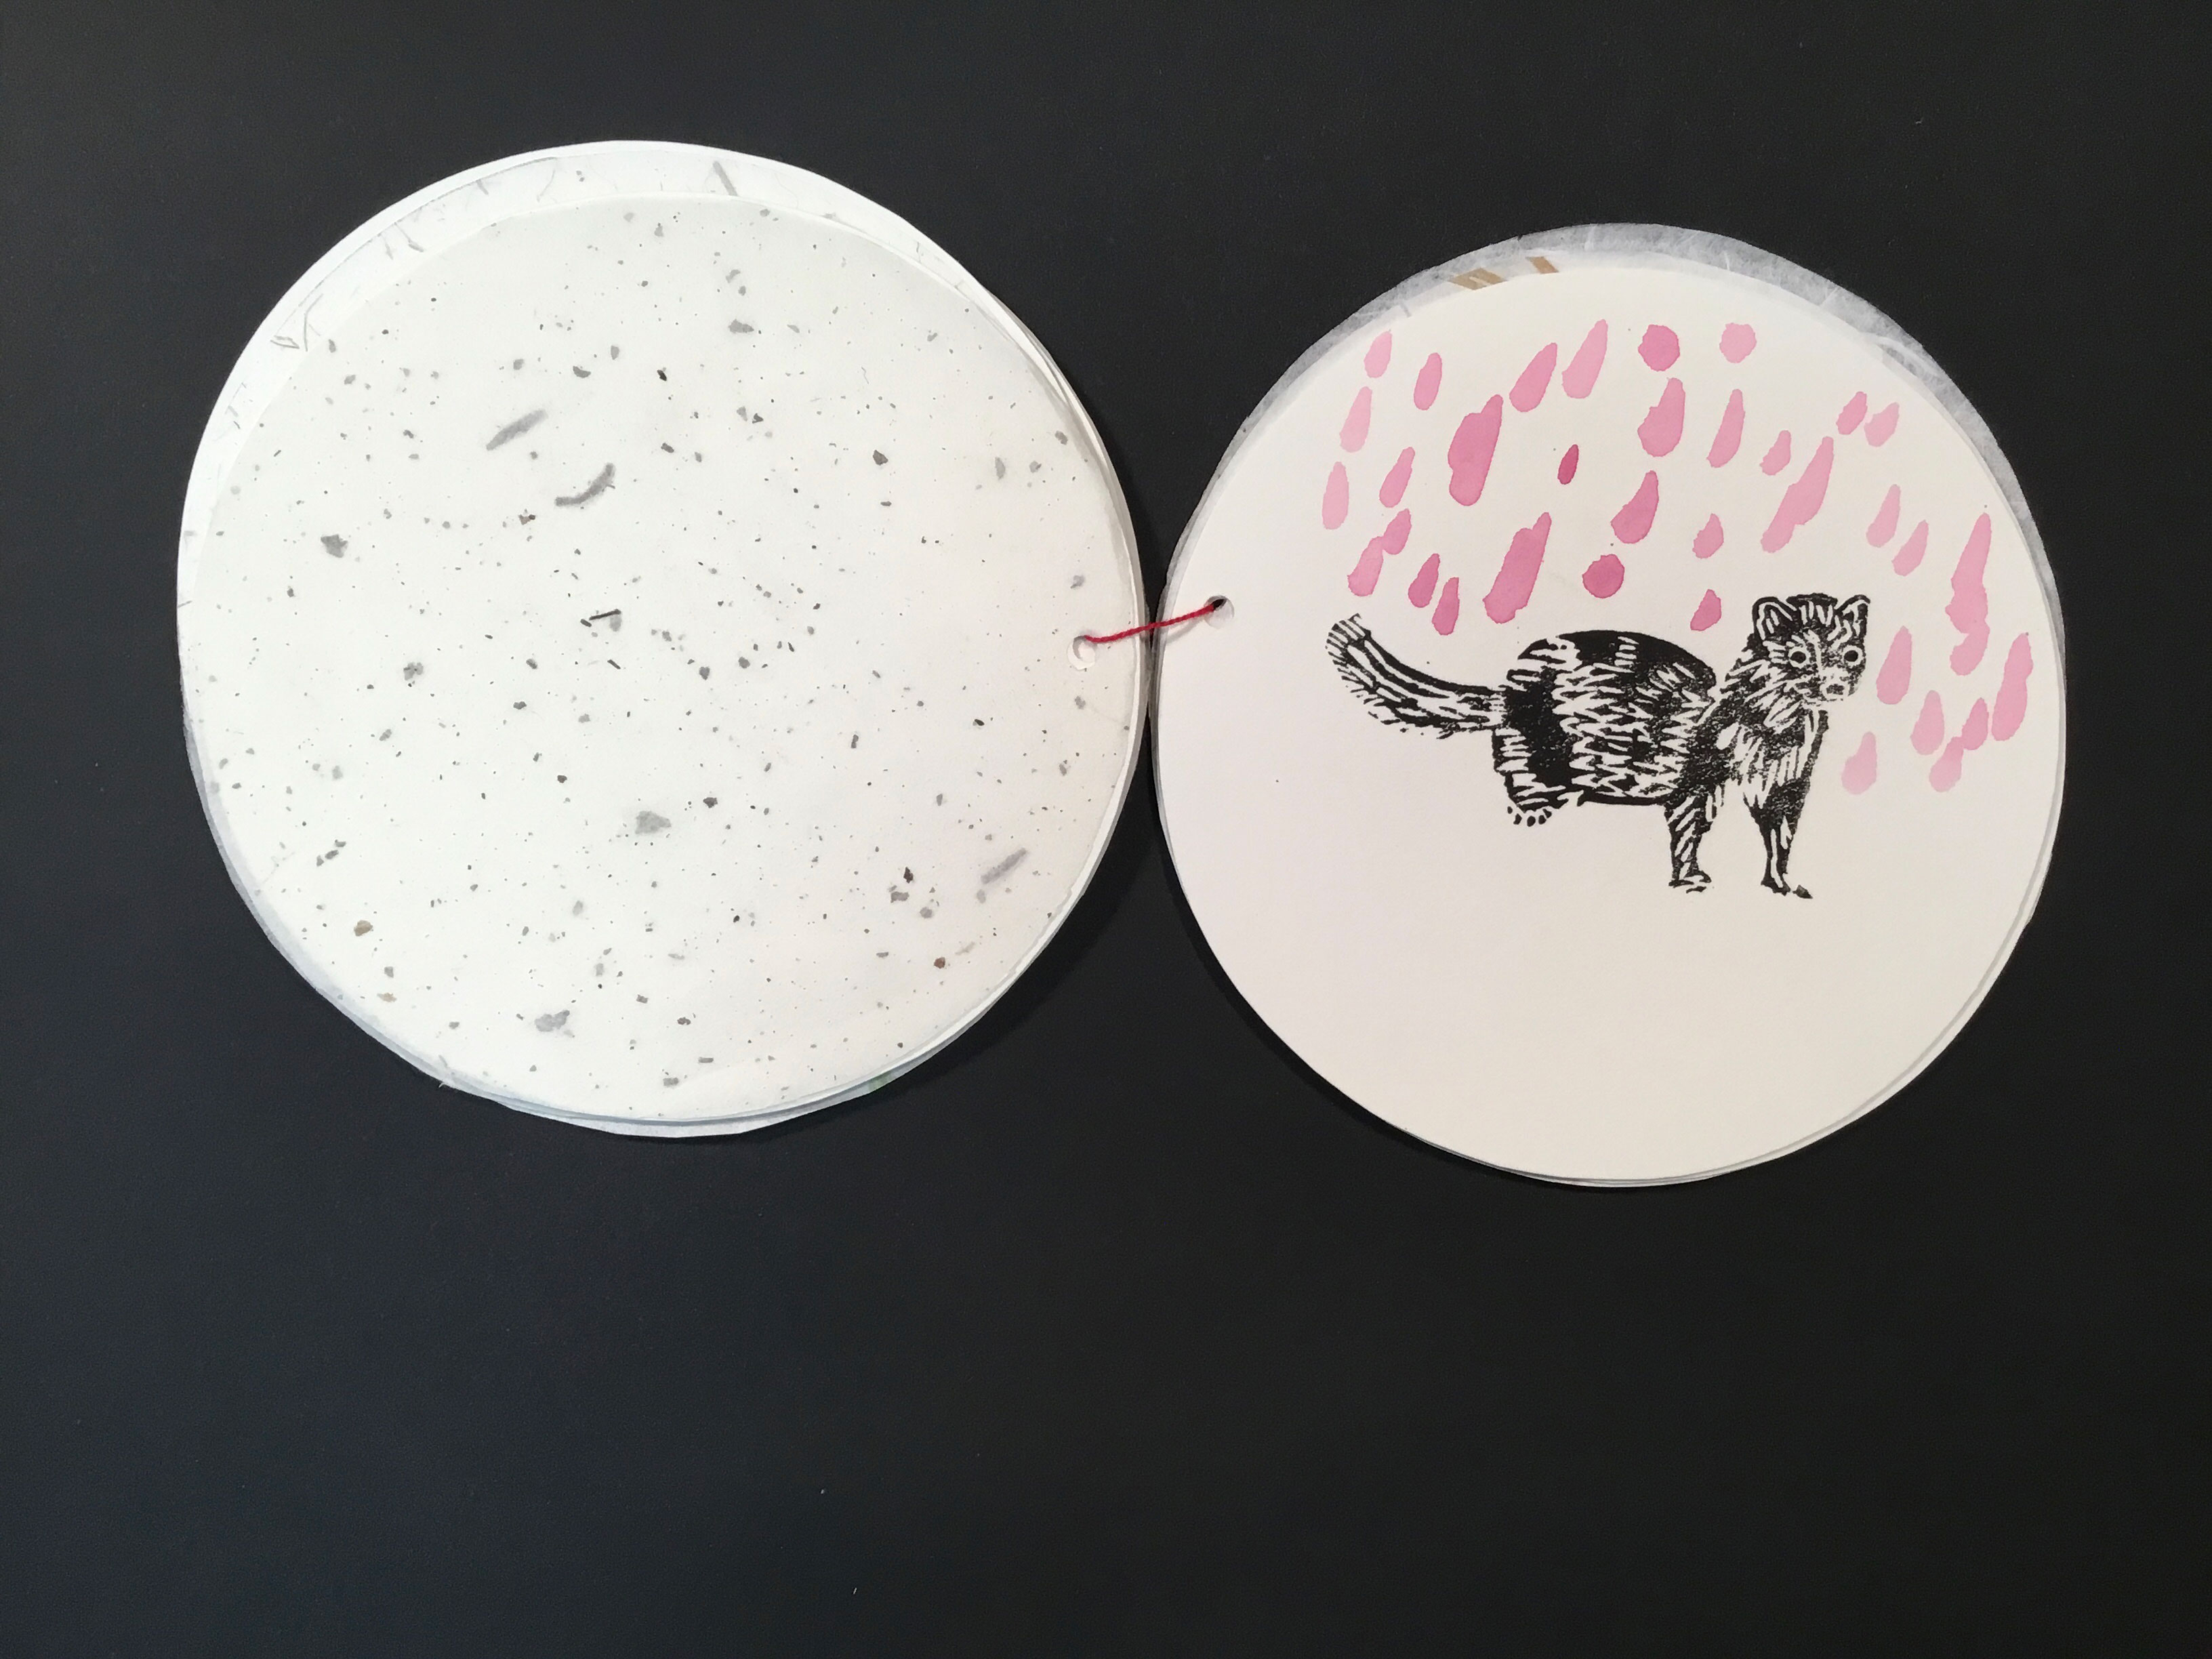 A circular sheet of paper with a painted image of a weasel or ferret on it with pink rain in the background. 